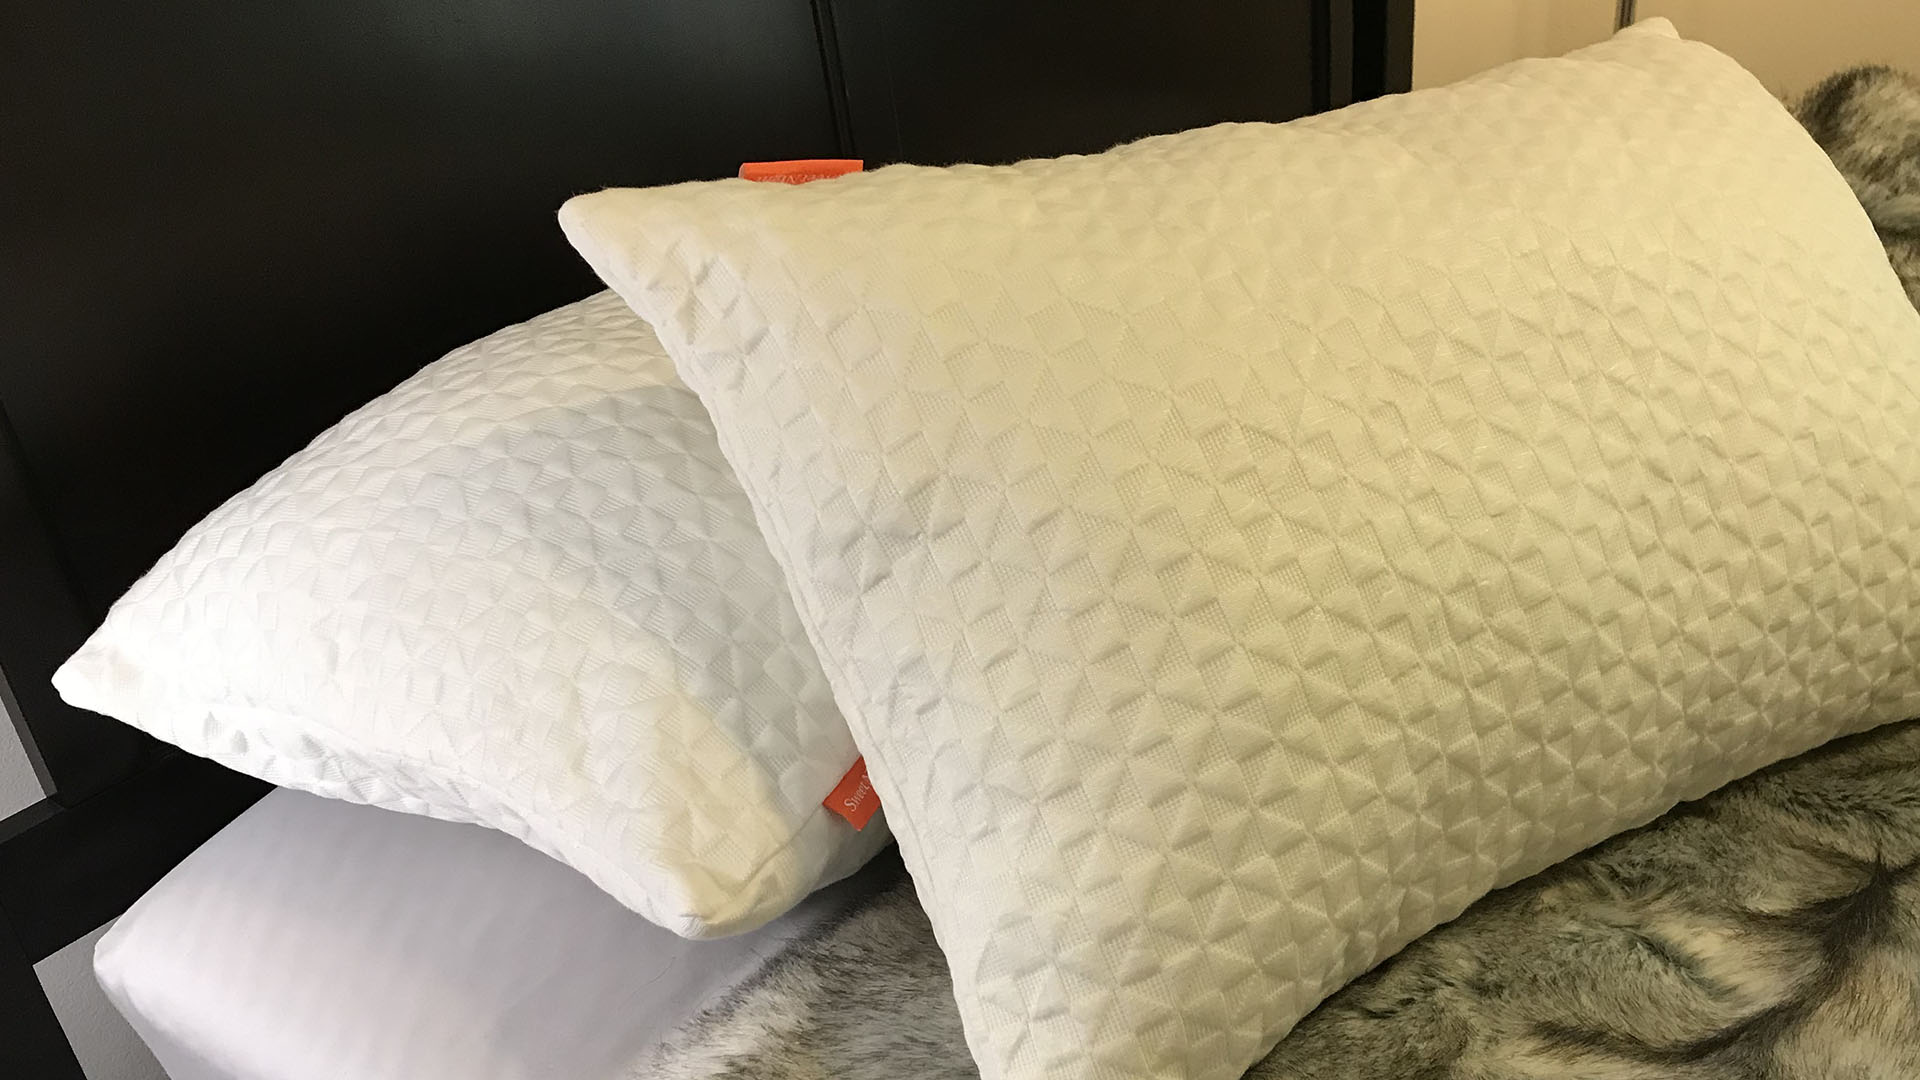 SweetNight Original Cooling Gel Foam Pillow review: an outstandingly comfortable all-rounder